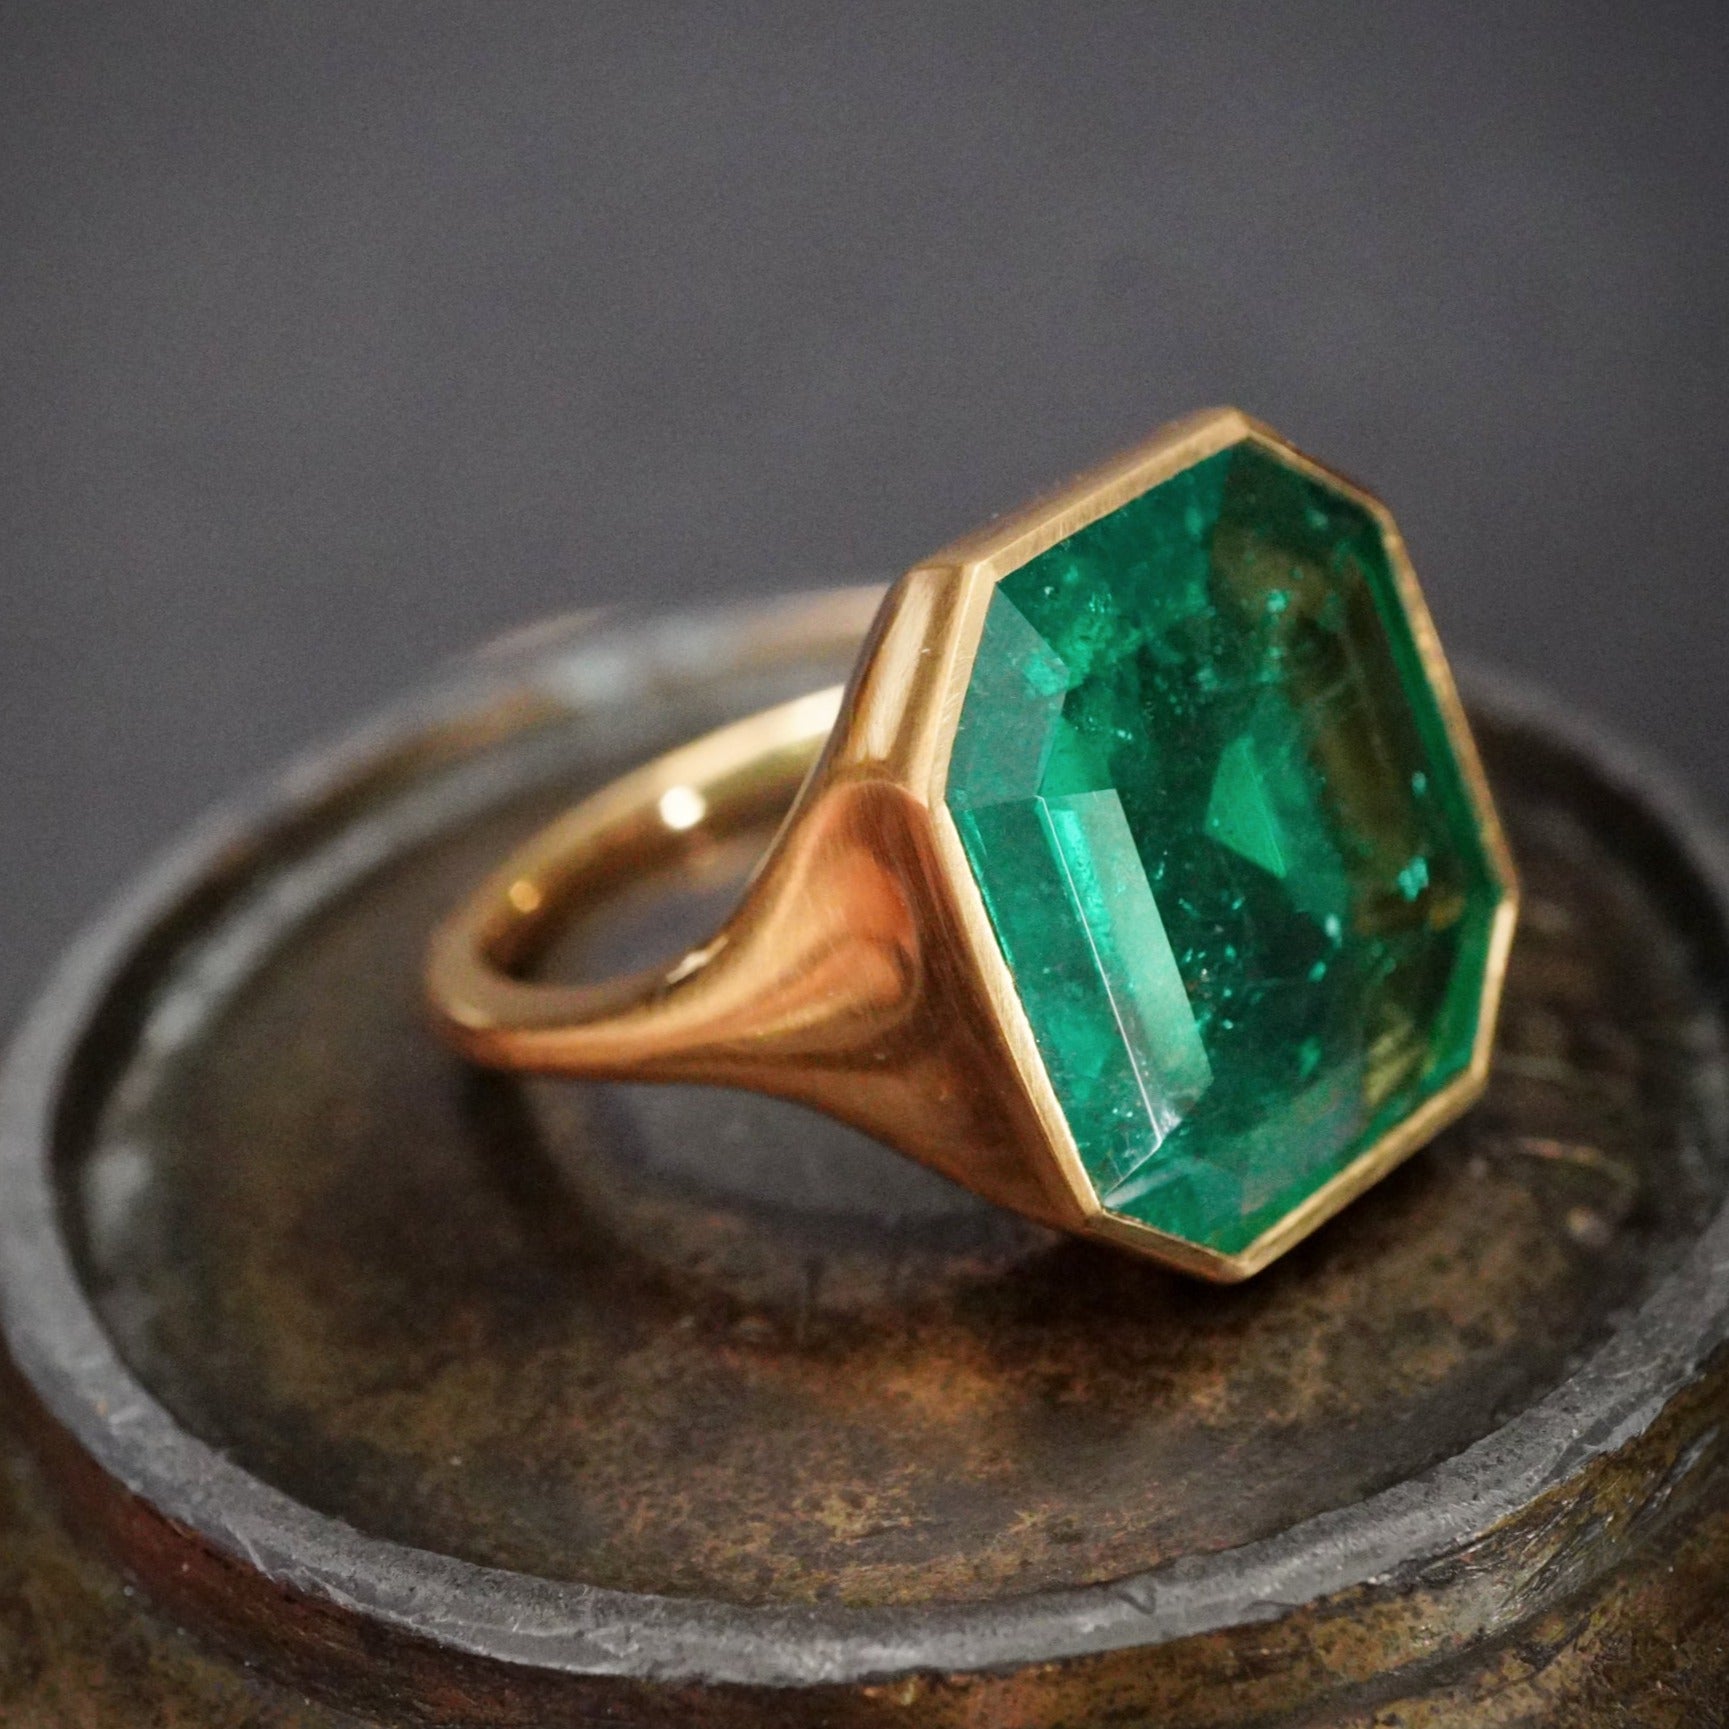  Anup Jogani 5.88ct Colombian Emerald Gold Ring: Emerald City Charm 4